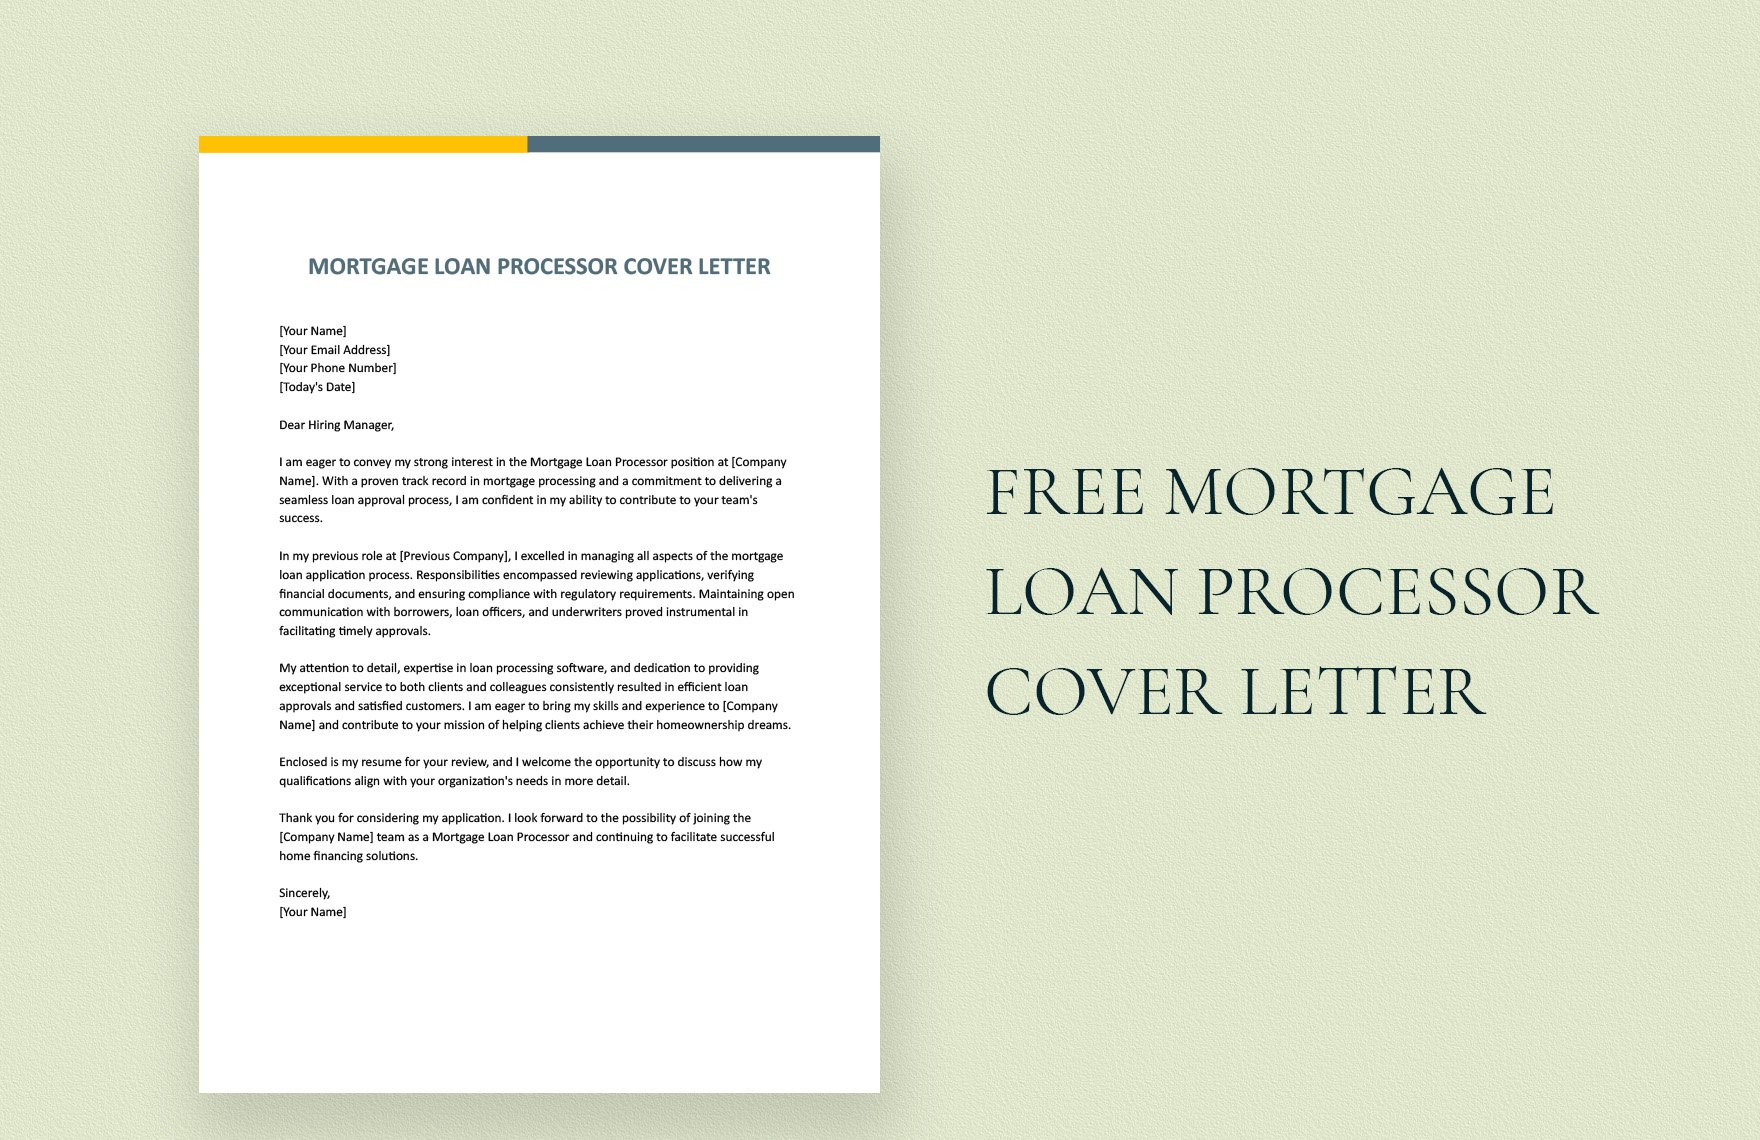 Mortgage Loan Processor Cover Letter in Word, Google Docs